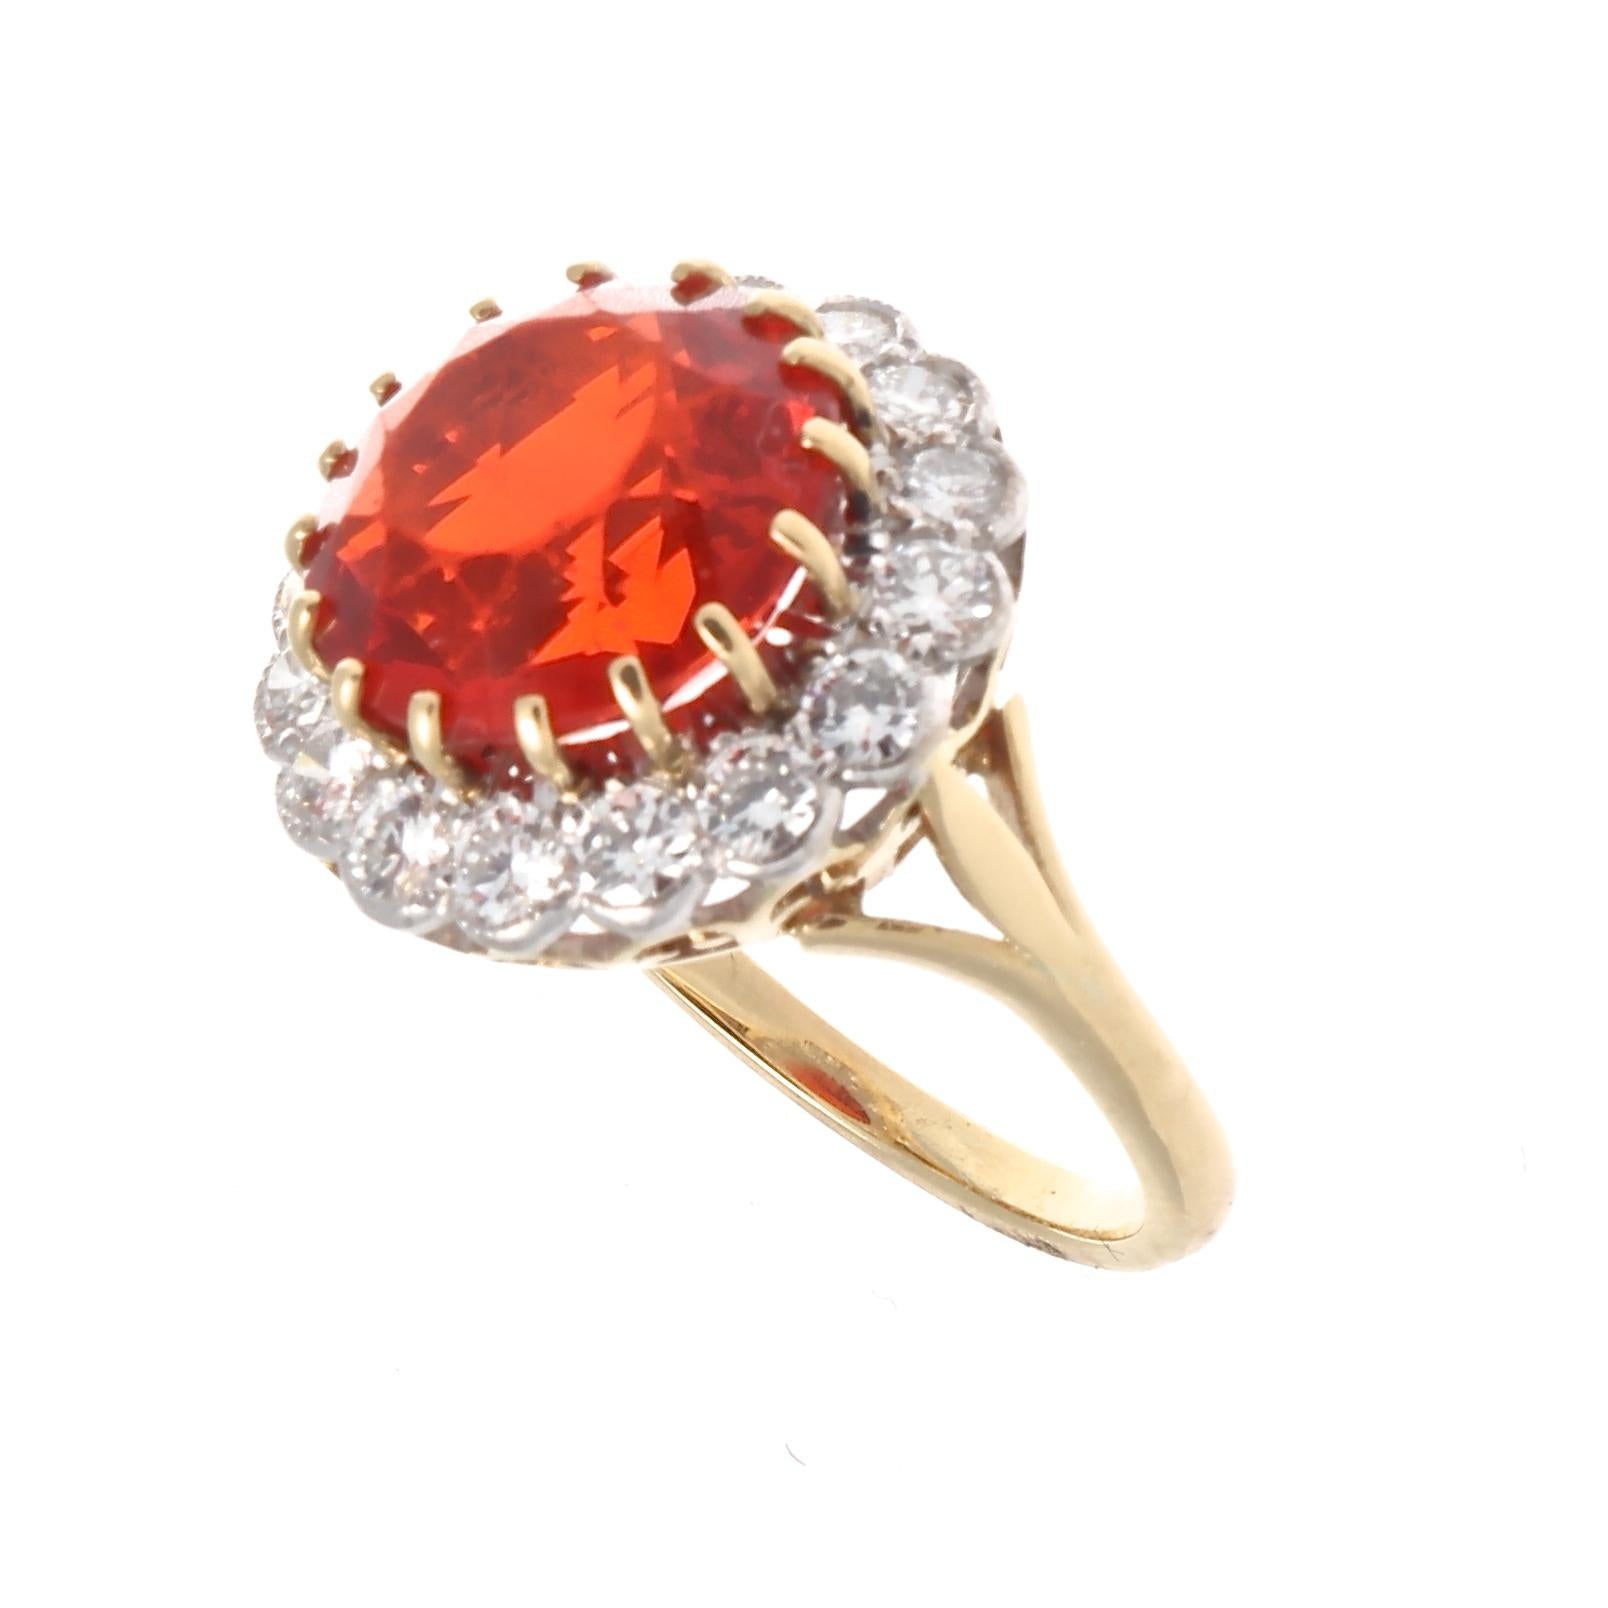 Fire Opal is a variety of opal that has a bright yellow, bright orange or bright red background color. Featuring an approximately 4 carat scorching reddish-orange fire opal surrounded by a halo of colorless round brilliant cut diamonds. Crafted in